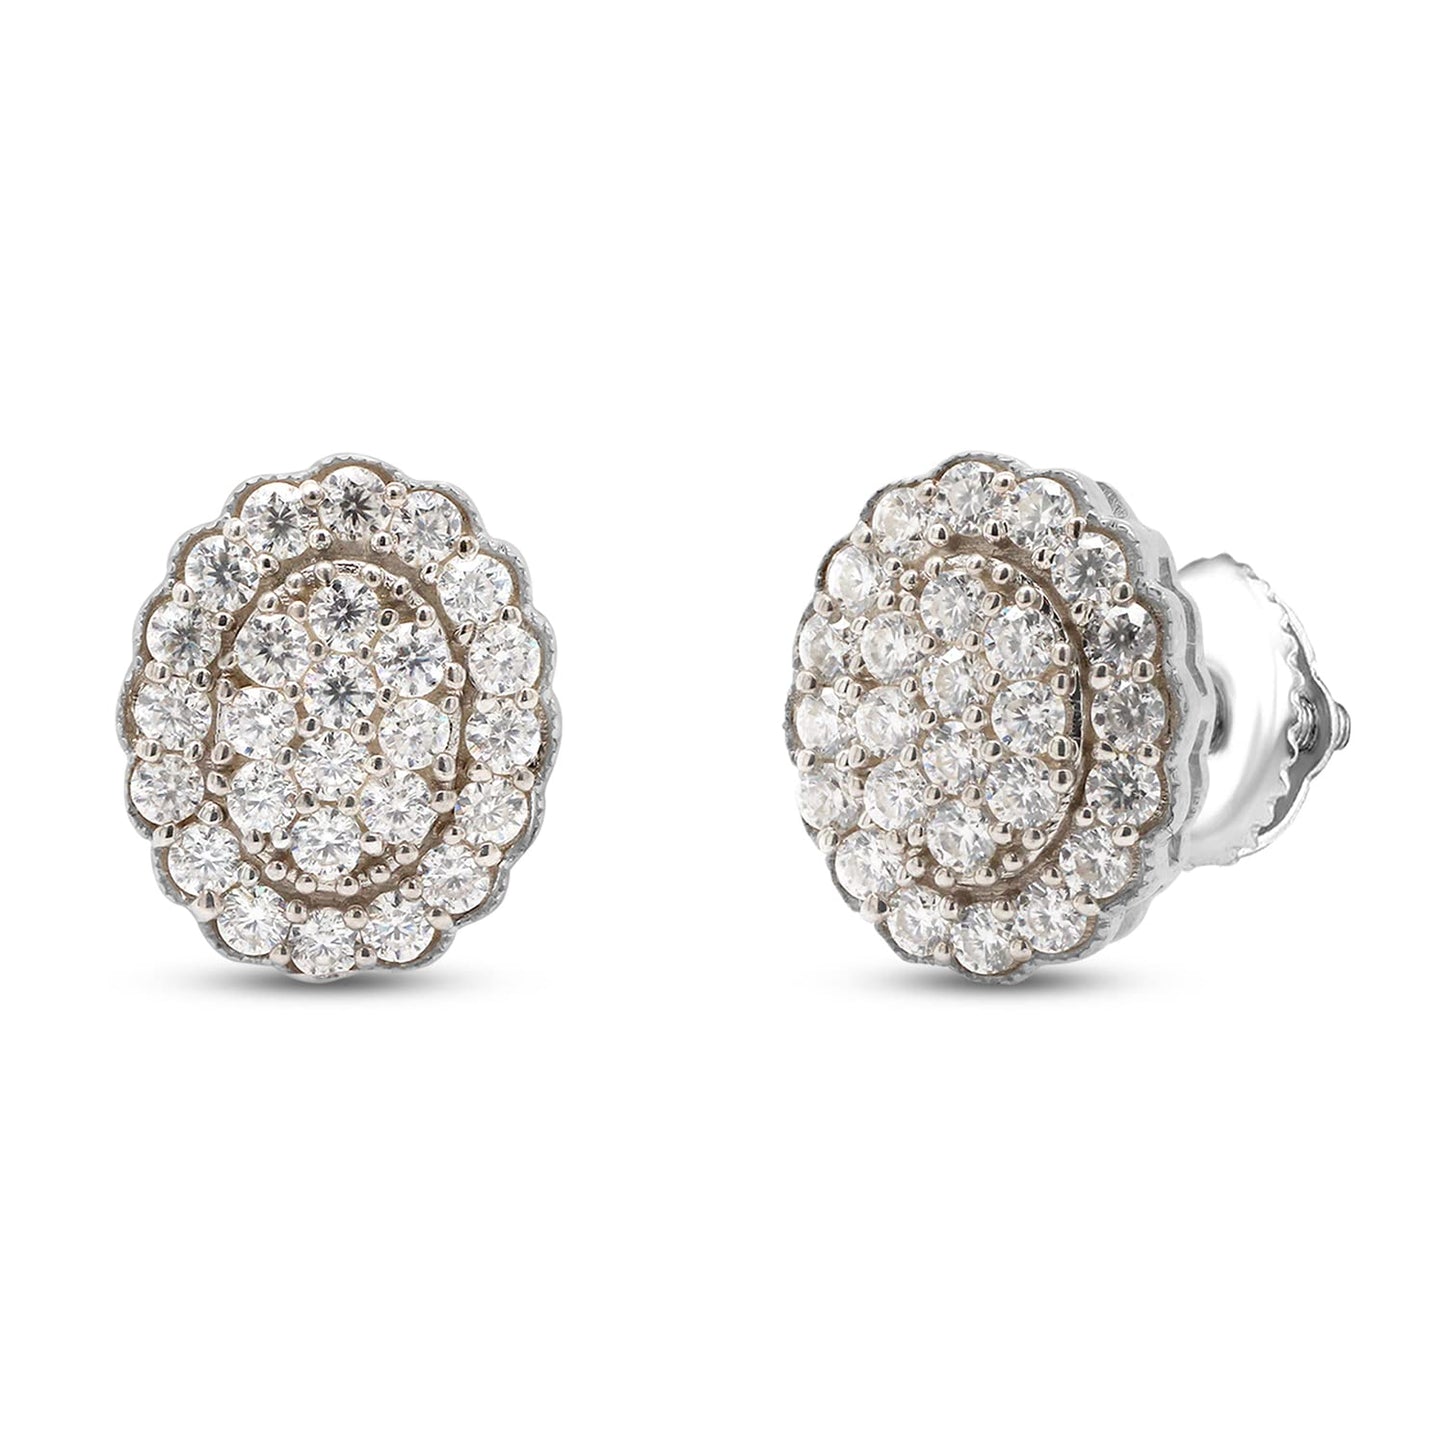 0.50 Carat Round Cut Lab Created Moissanite Diamond Cluster Stud Earrings In 925 Sterling Silver Jewelry For Women